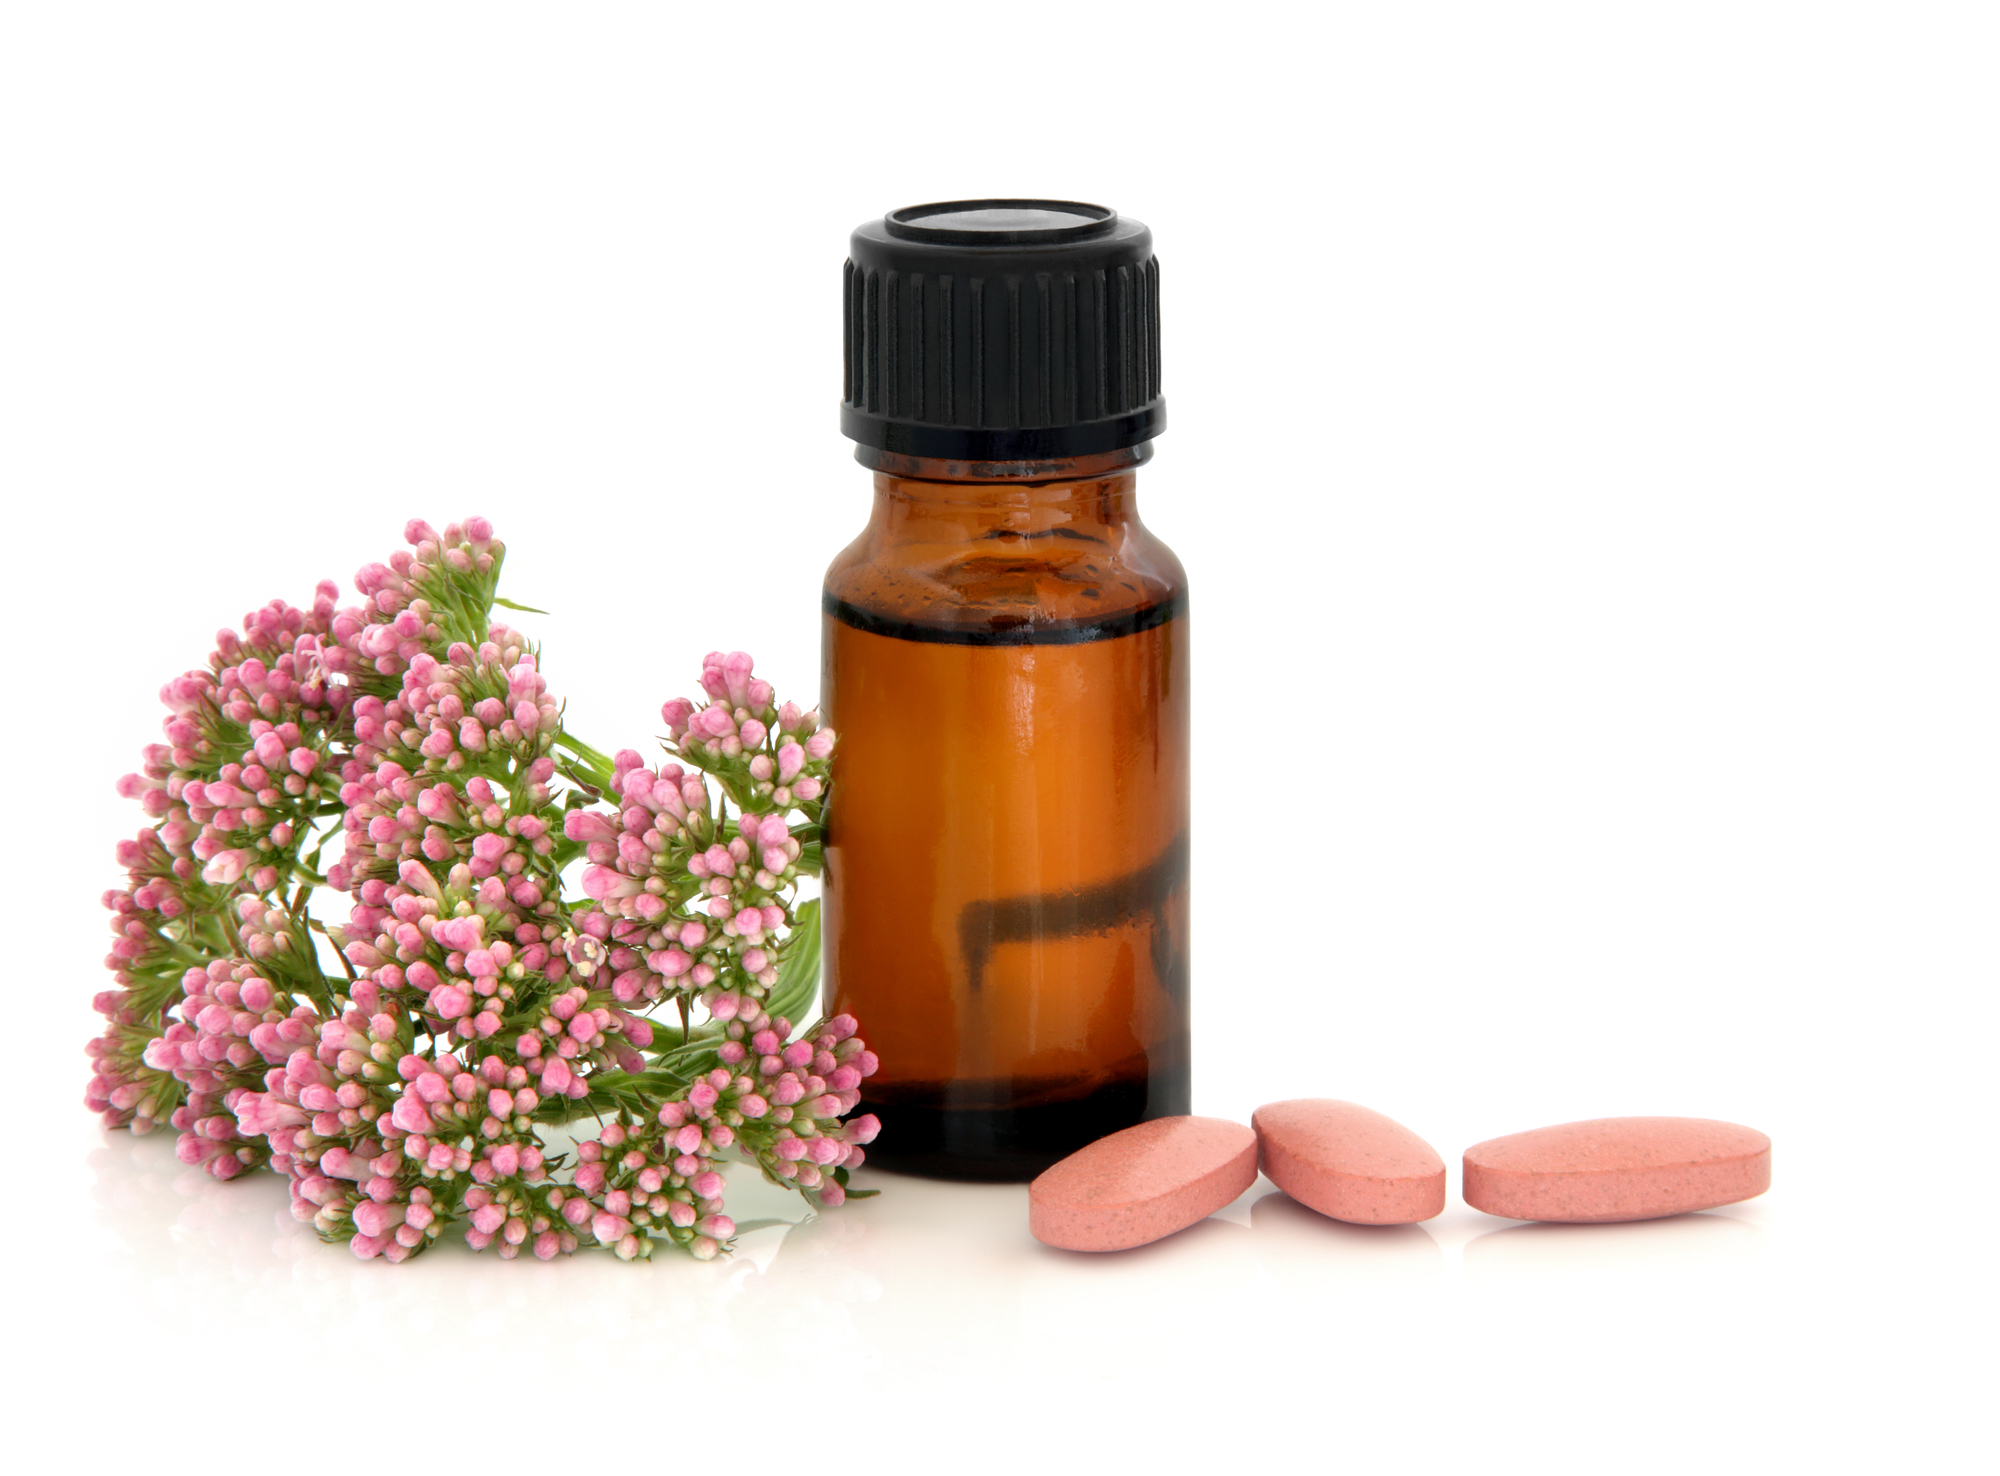 Valerian can improve sleep in children with ADHD, Cognitive Impairment, and Neurodevelopmental Disorders.